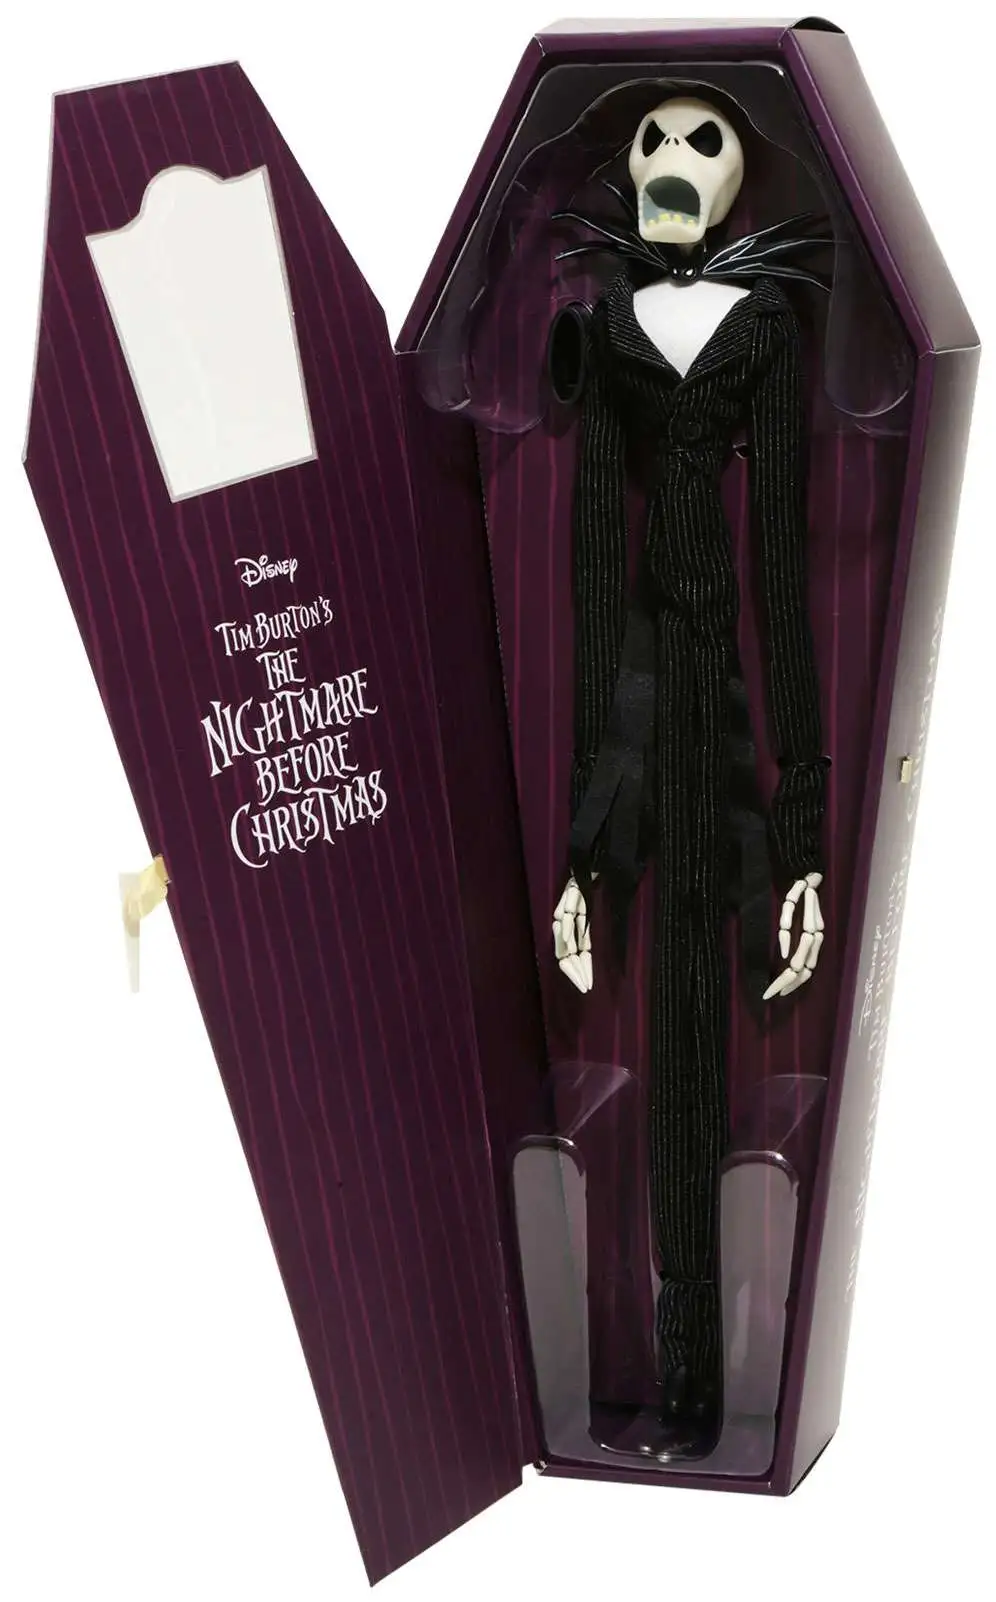 Podium Jack Nightmare Before Xmas 14 Inch Action Figure Deluxe Coffin Doll 